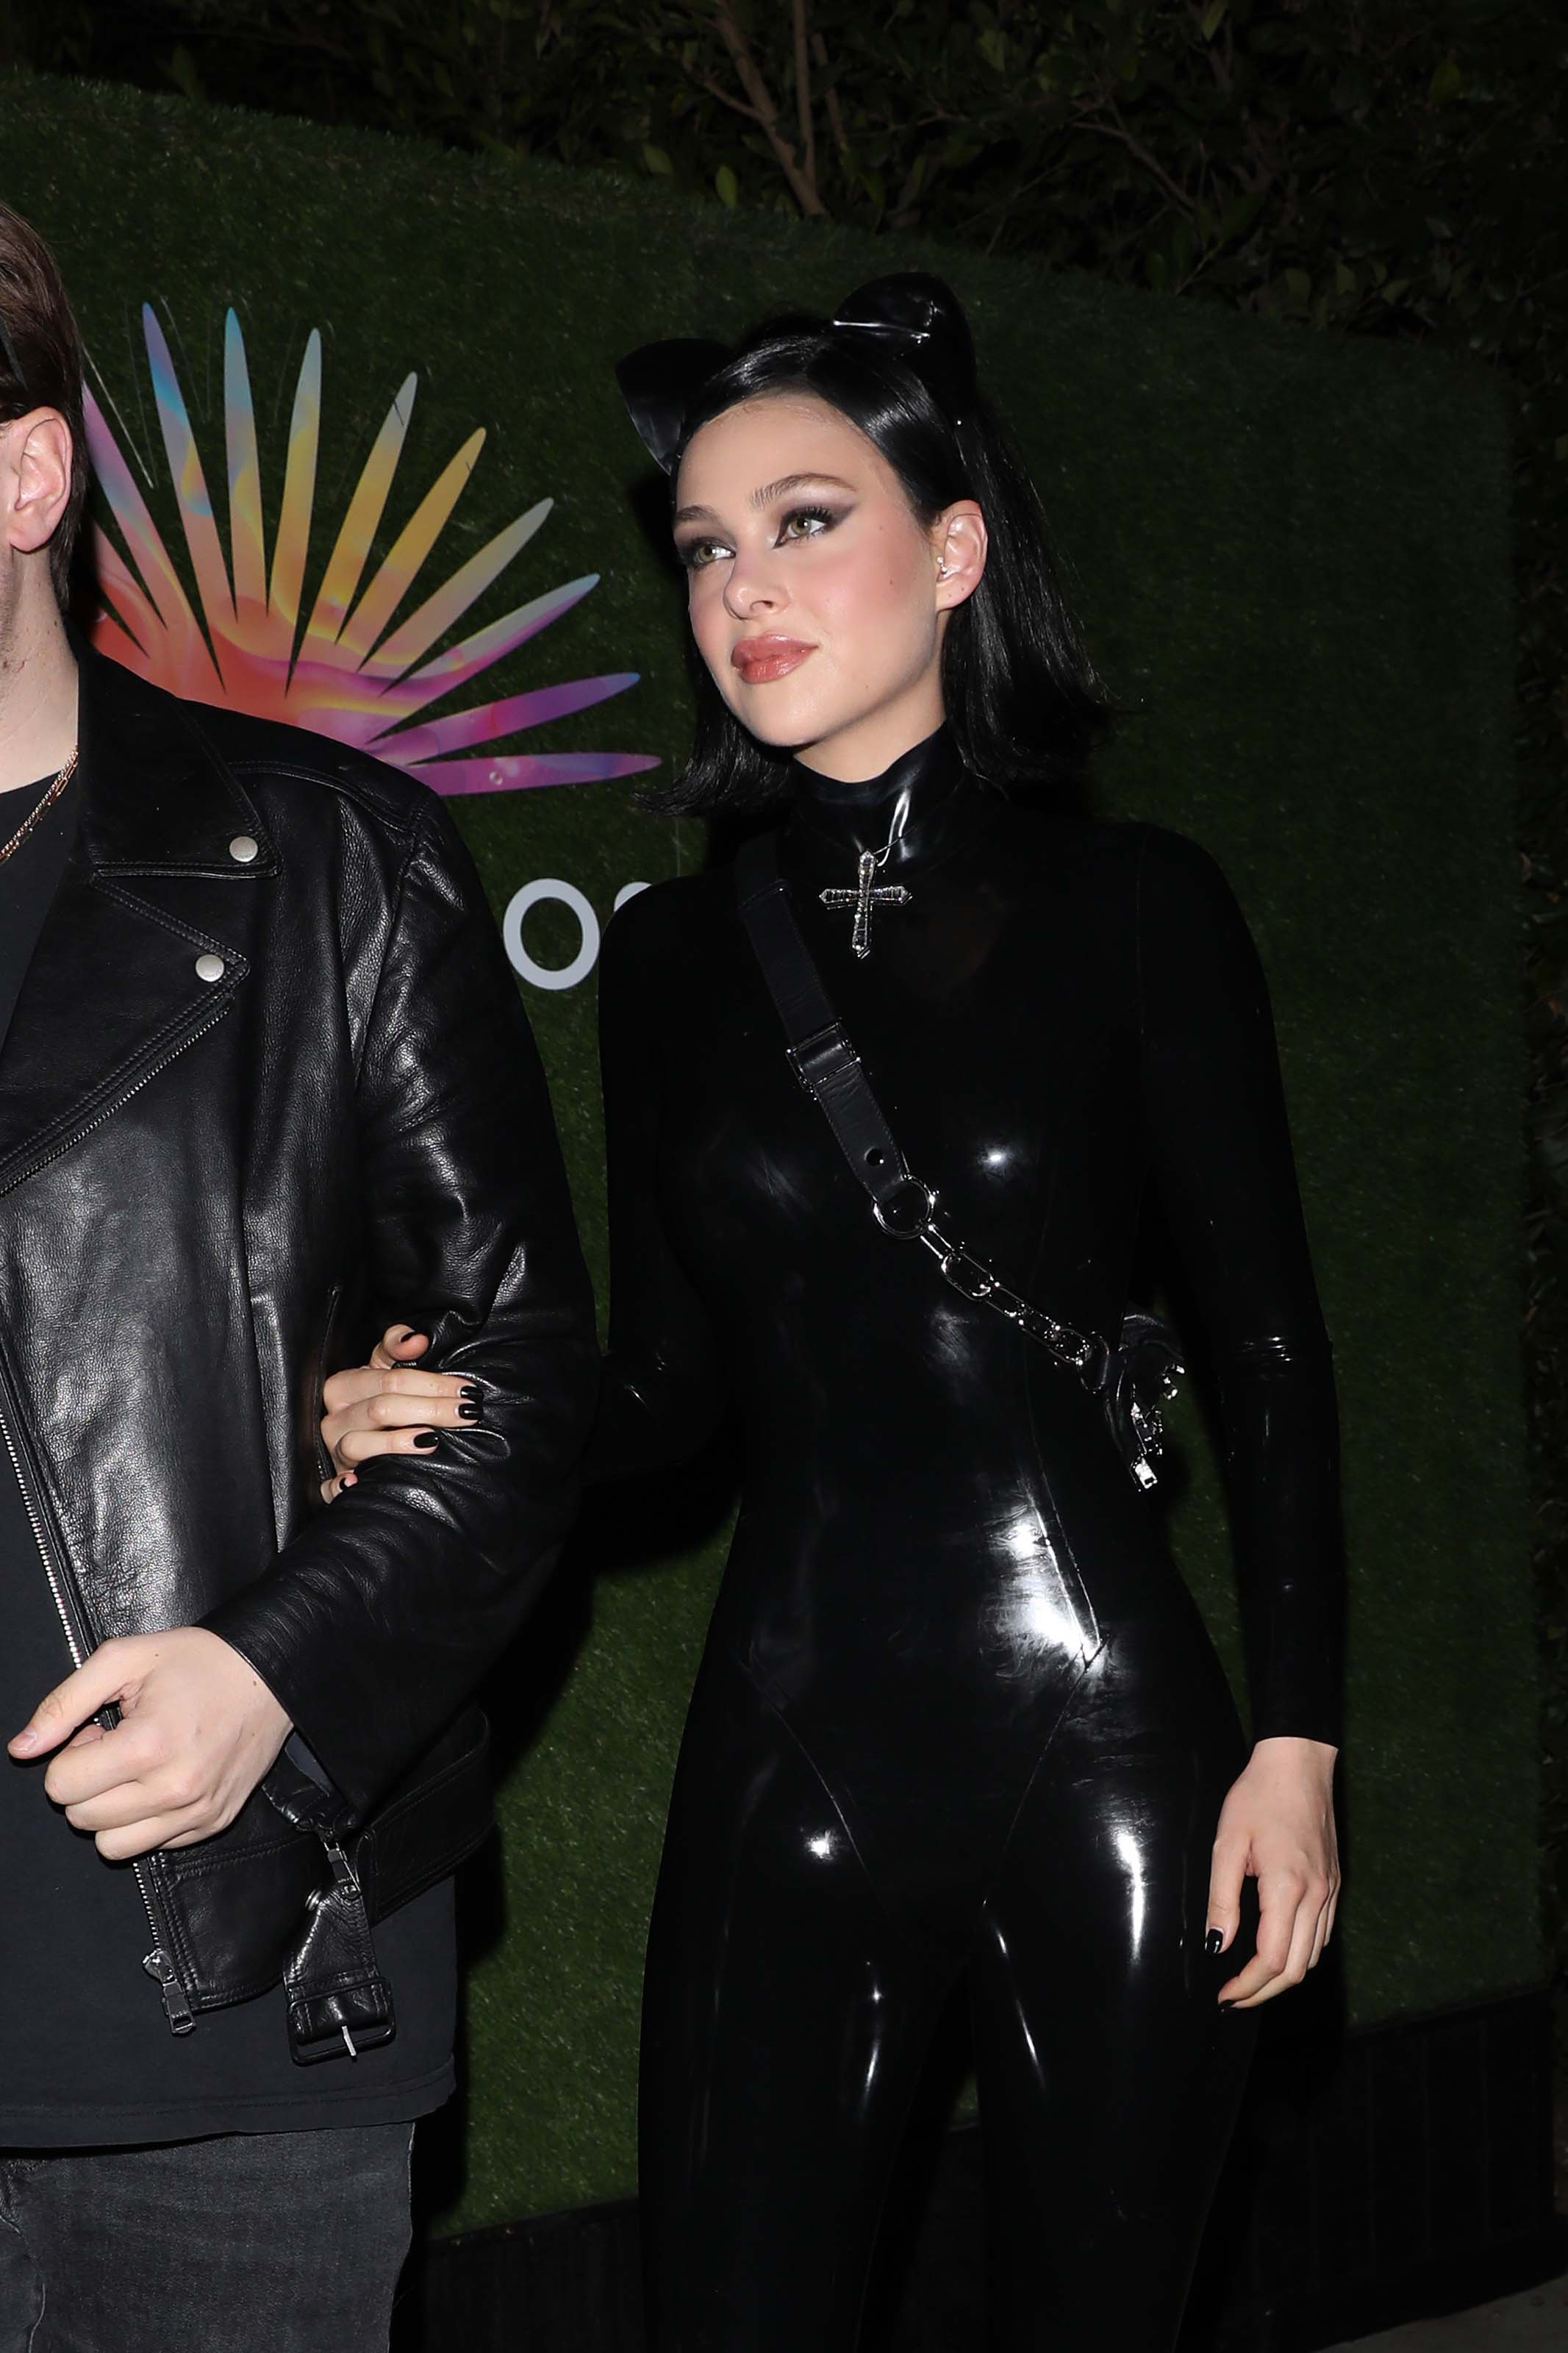 Nicola Peltz and her friend head to the 2019 Casamigos Halloween party